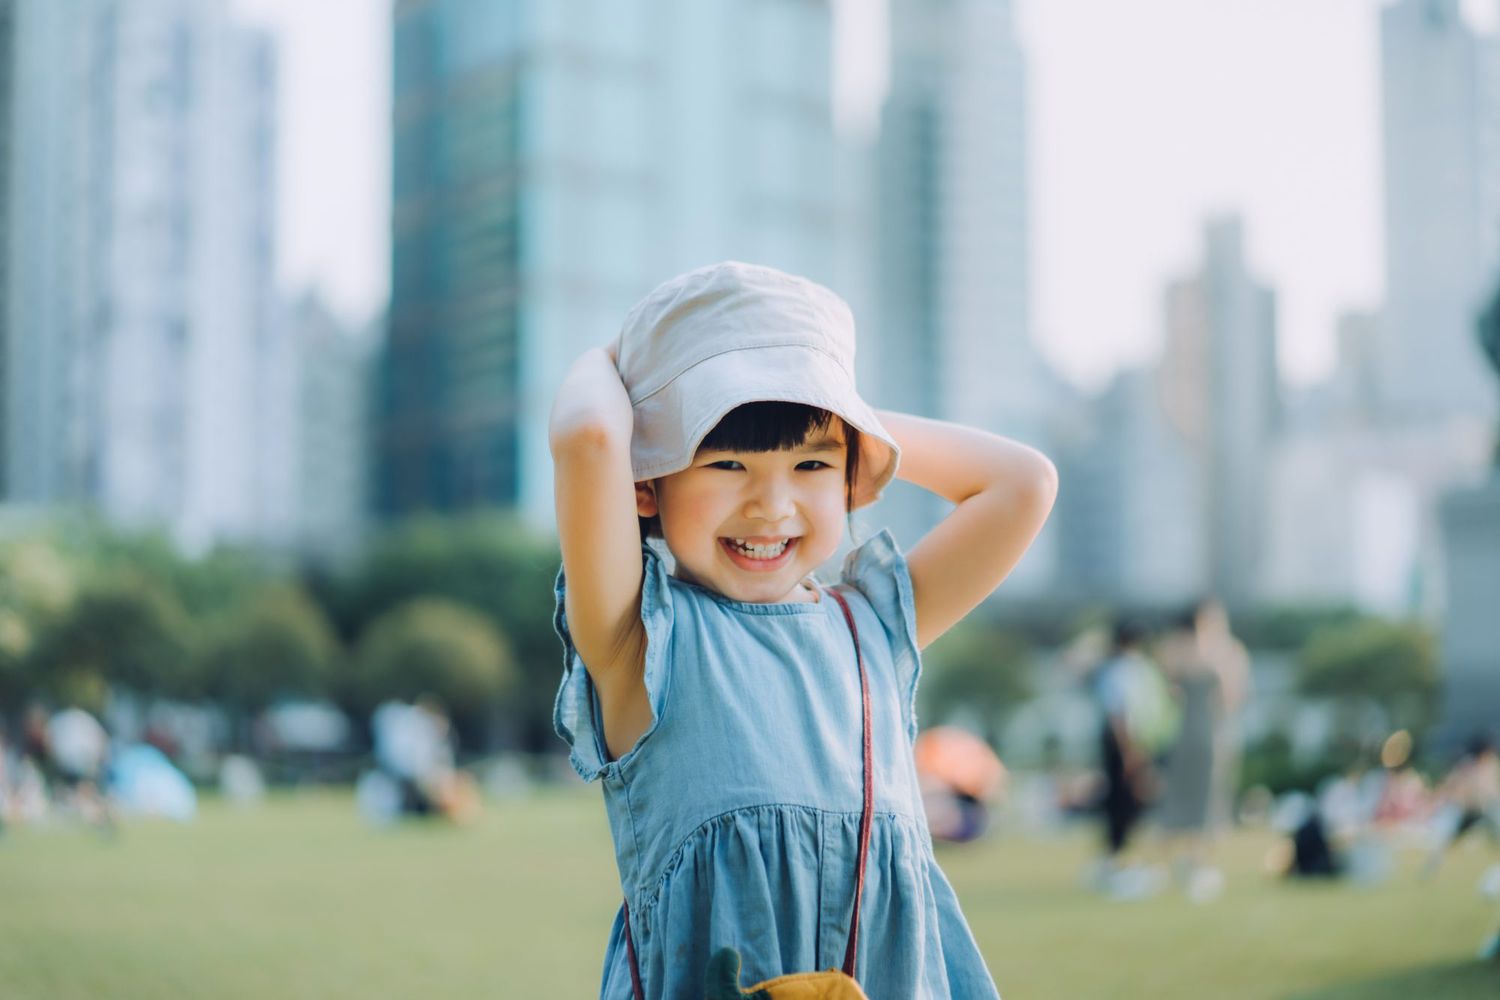 Portrait of happy little Asian girl having fun playing in urban park, smiling joyfully. Enjoying freedom and beauty of nature. With modern cityscape in background